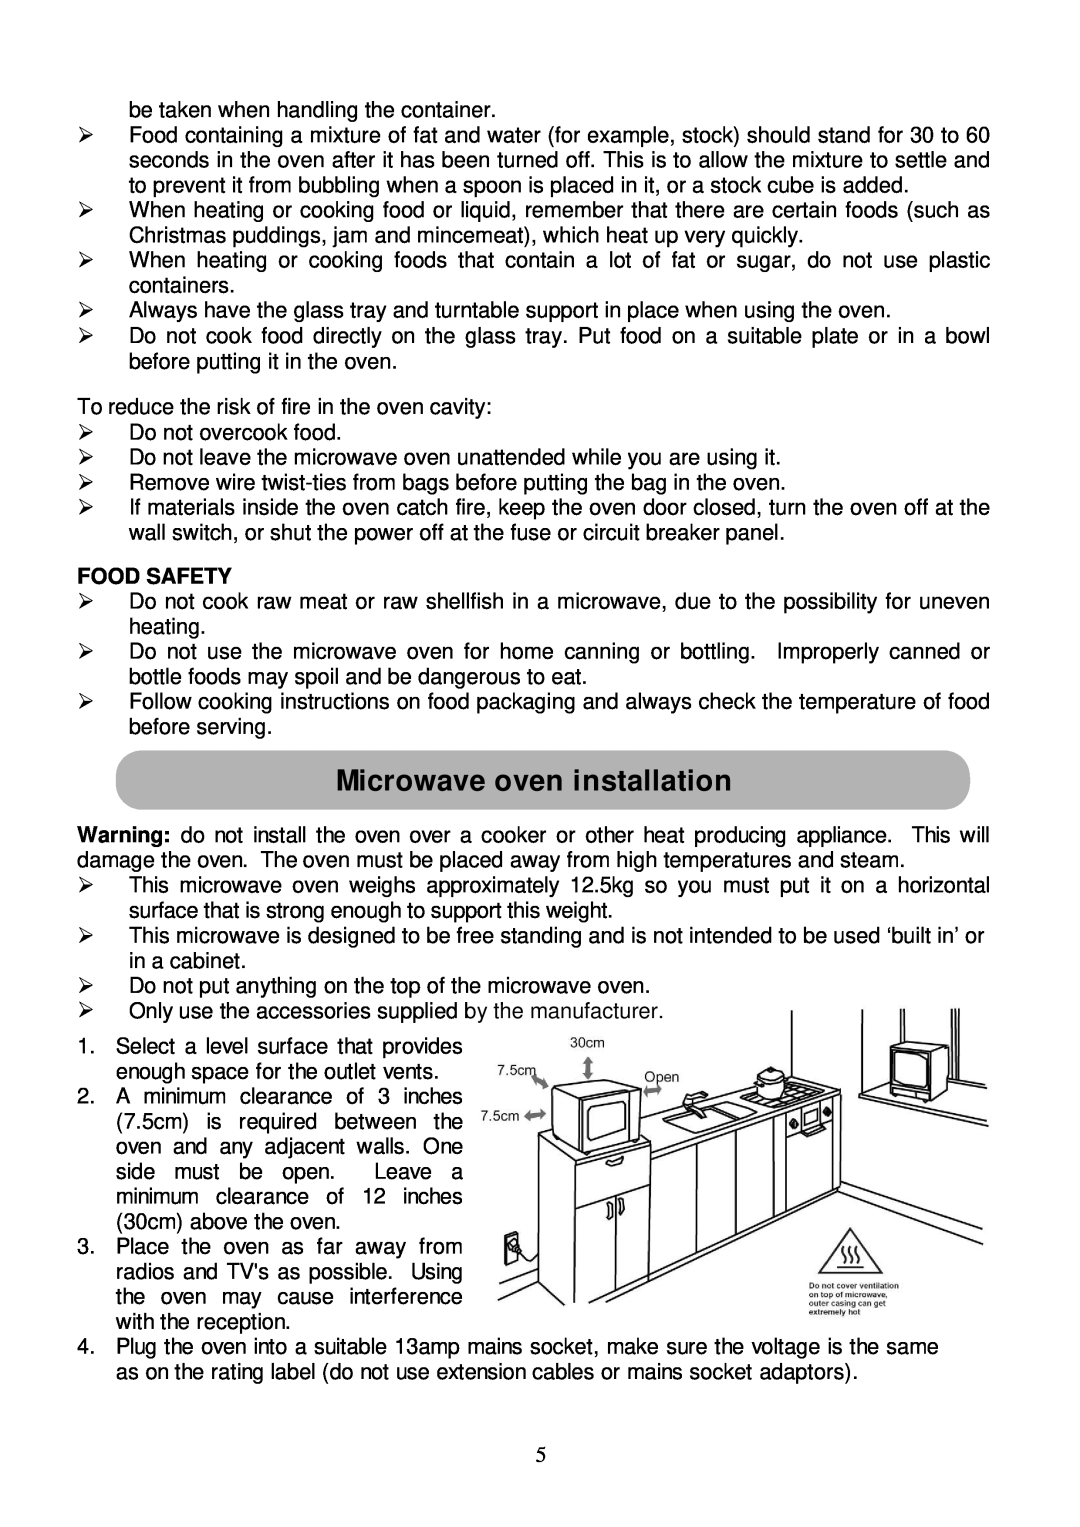 Russell Hobbs RHM2015 user manual Microwave oven installation, Food Safety 